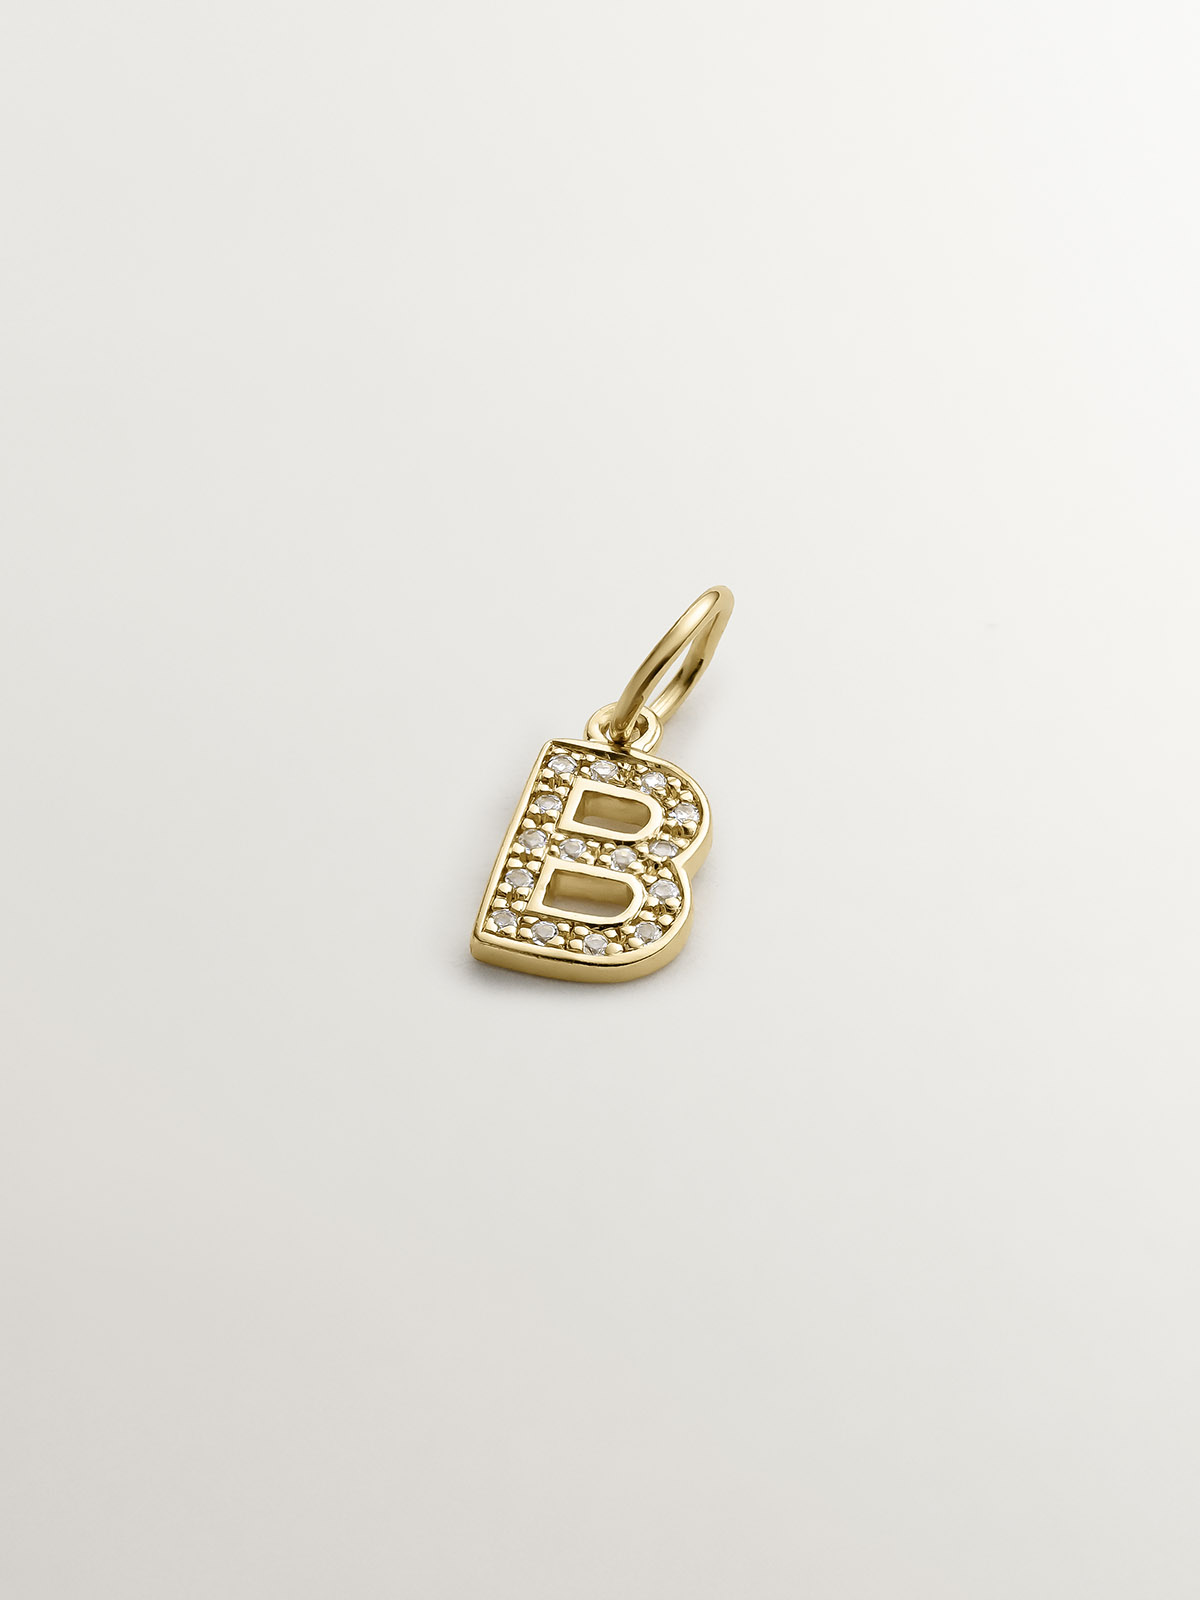 Initial B charm, made of 925 silver coated in 18K yellow gold and adorned with white topaz.